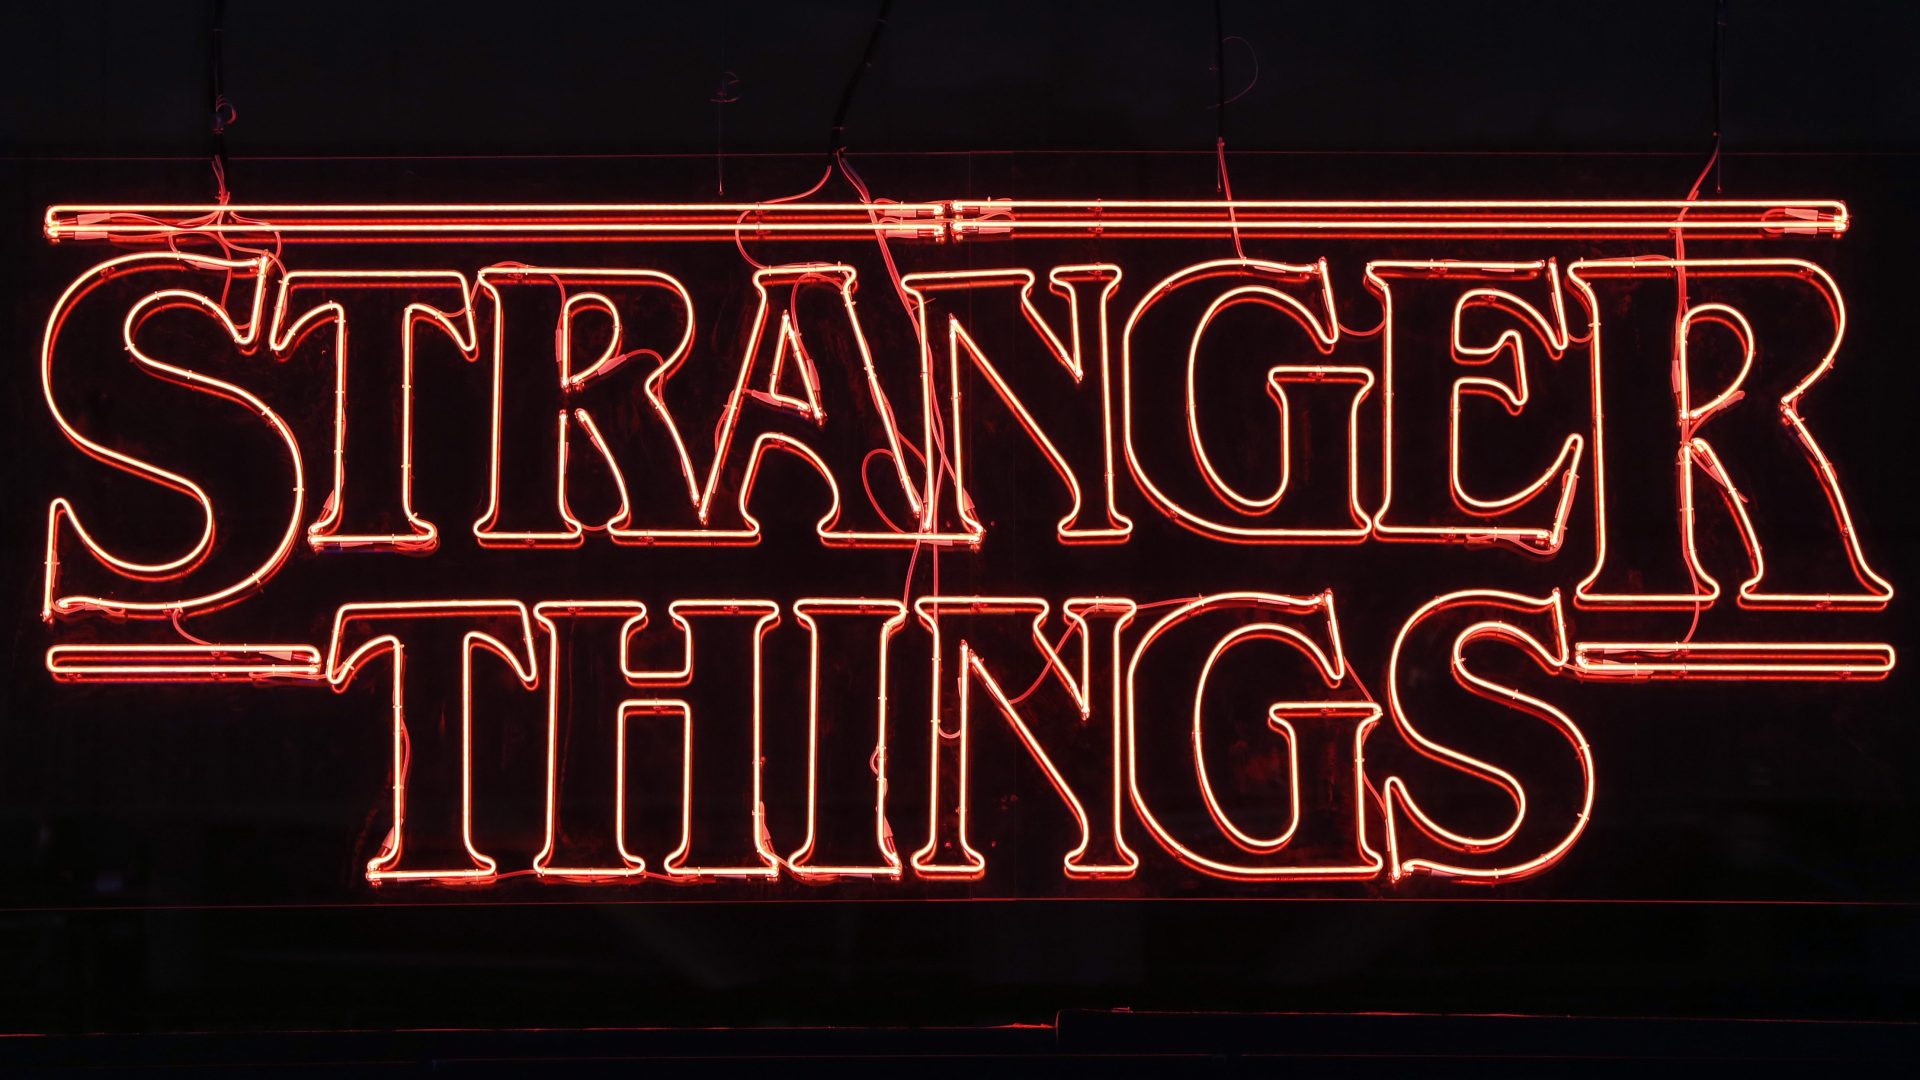 Stranger Things Season 4 Part 2 Release Date Confirmed For July